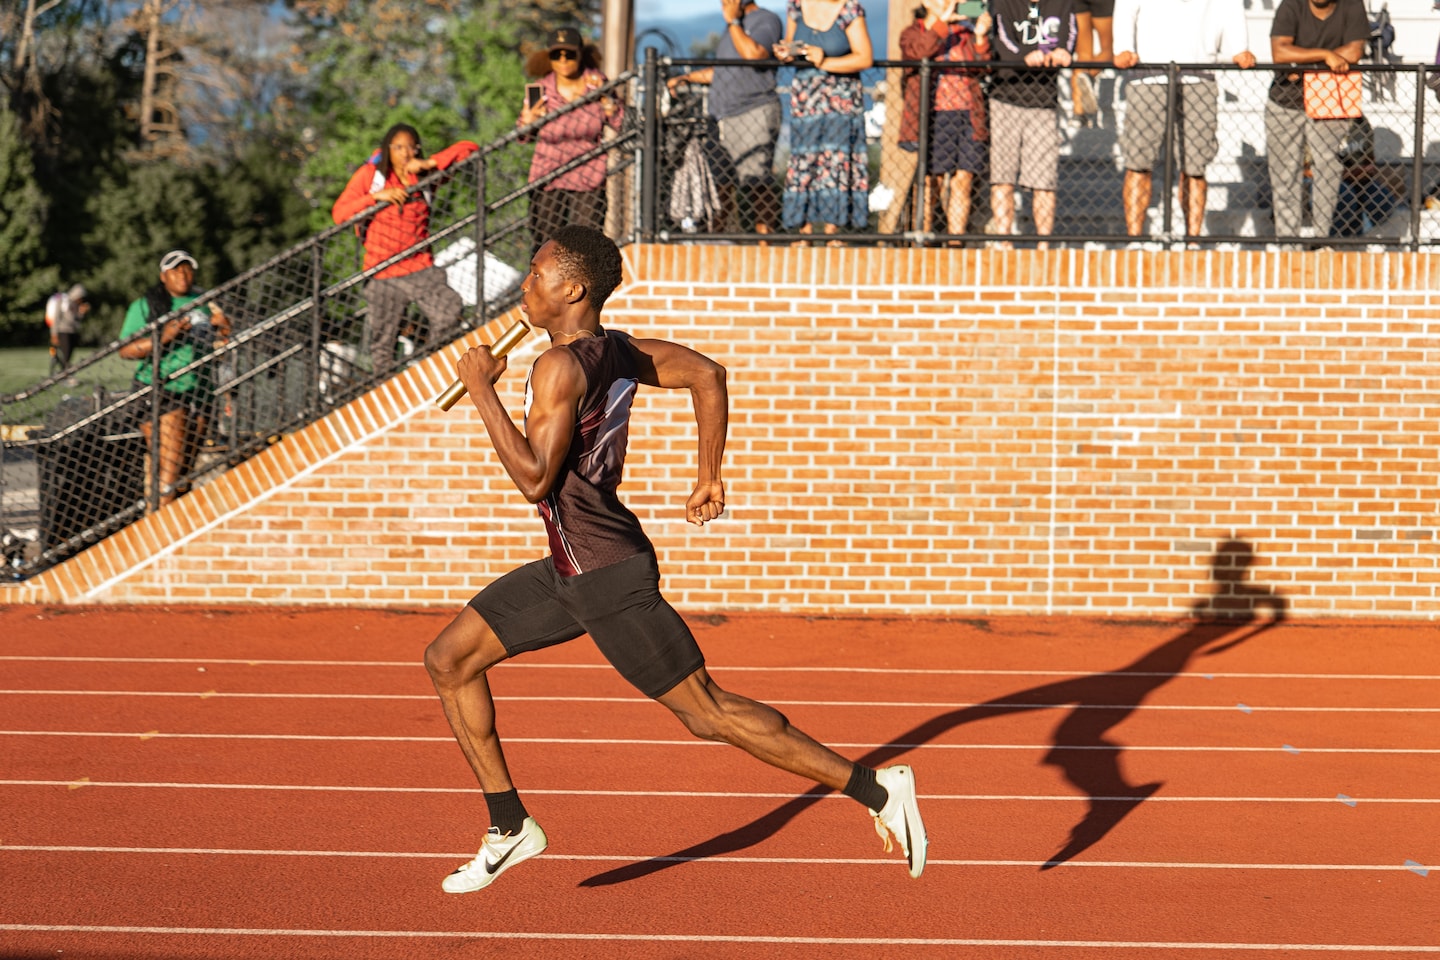 His new school didn’t have a debate team, so this track star founded one